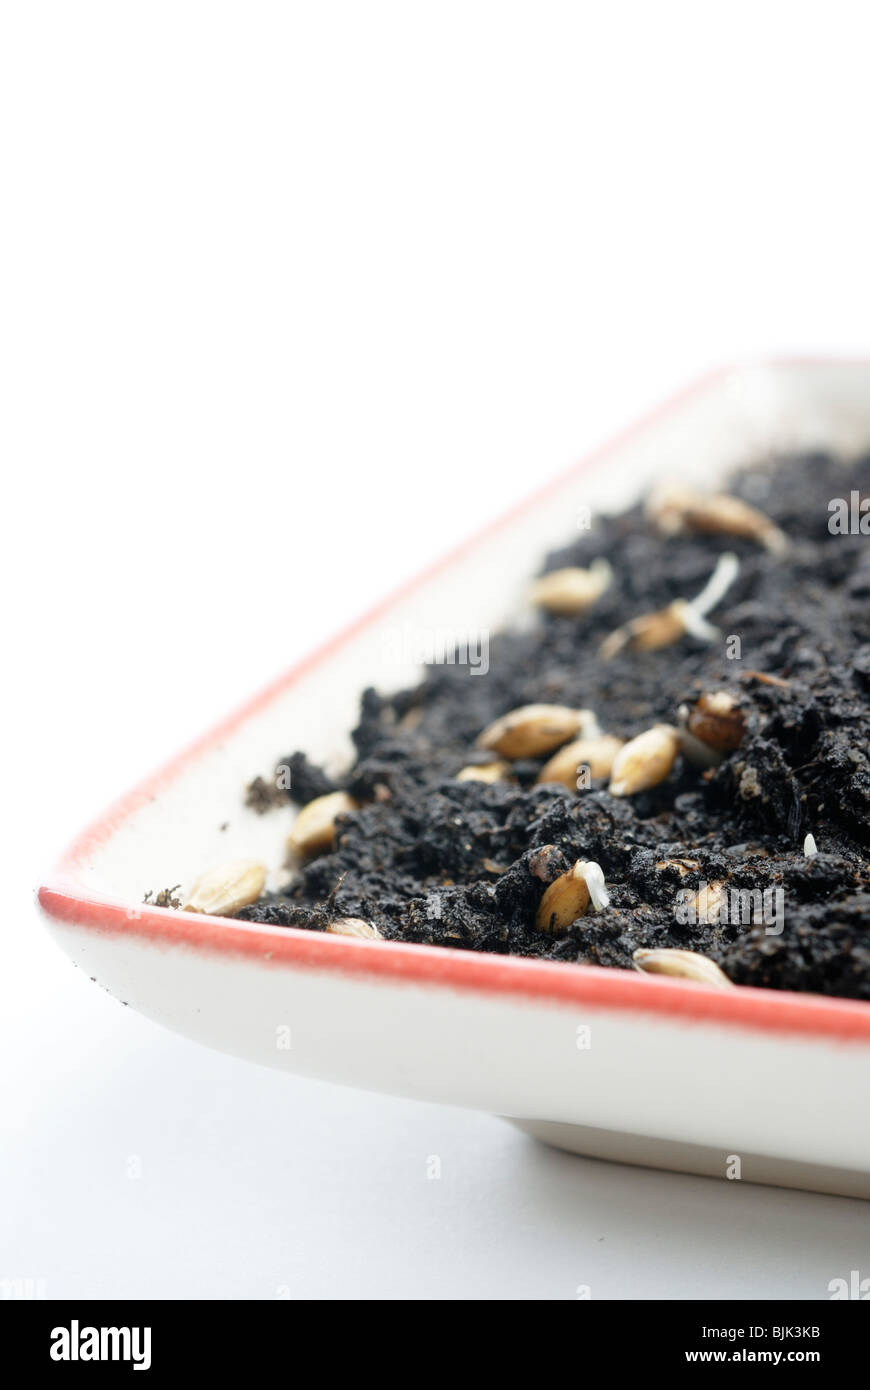 Container with tiny seedlings sprouting from soil Stock Photo